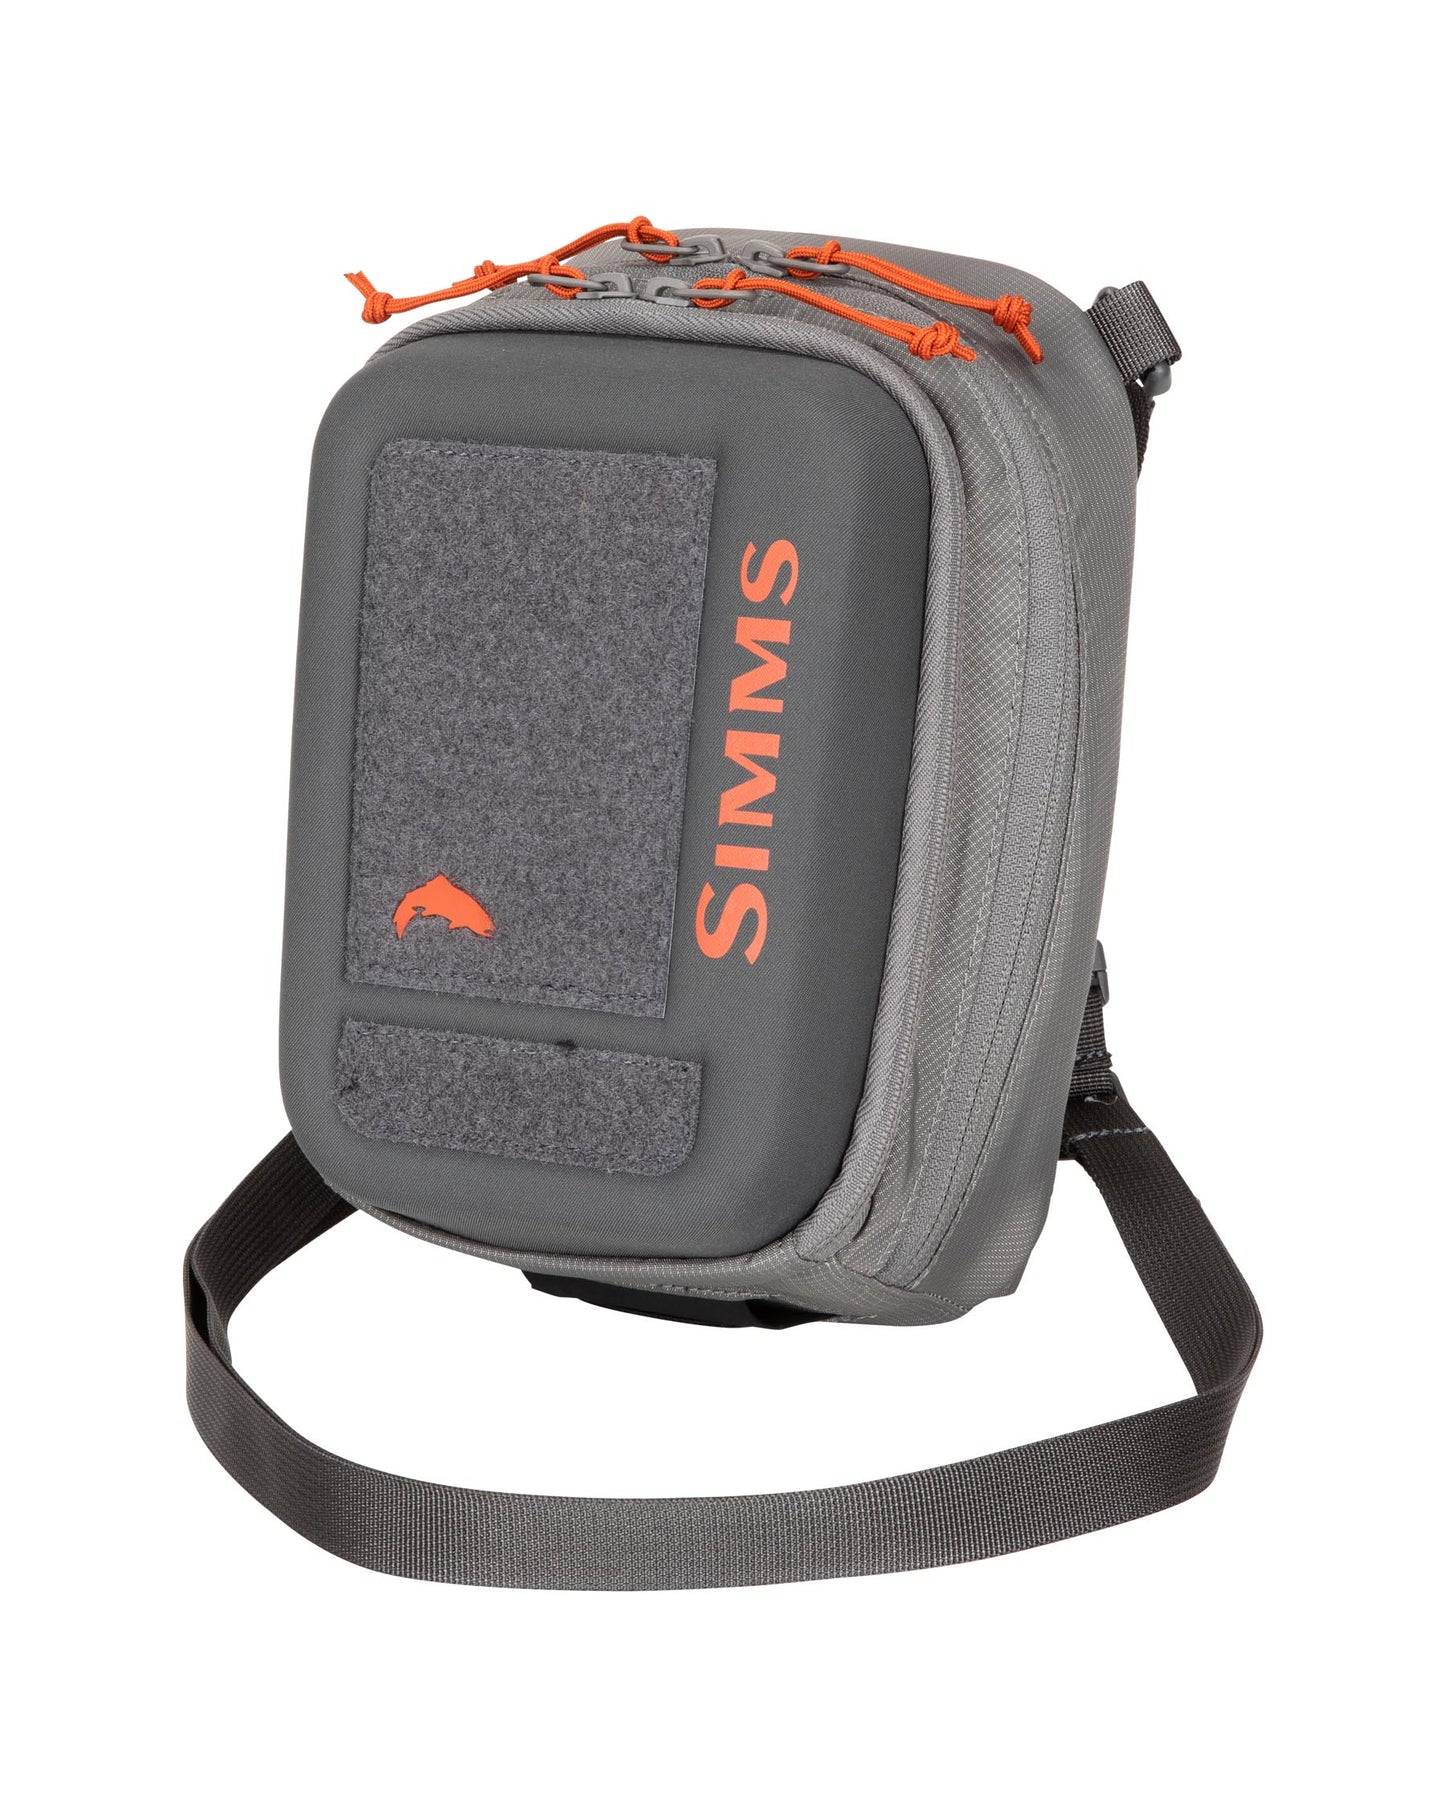 Shop Now - Fishing - Tackle Boxes & Storage - Backpack Chestpack